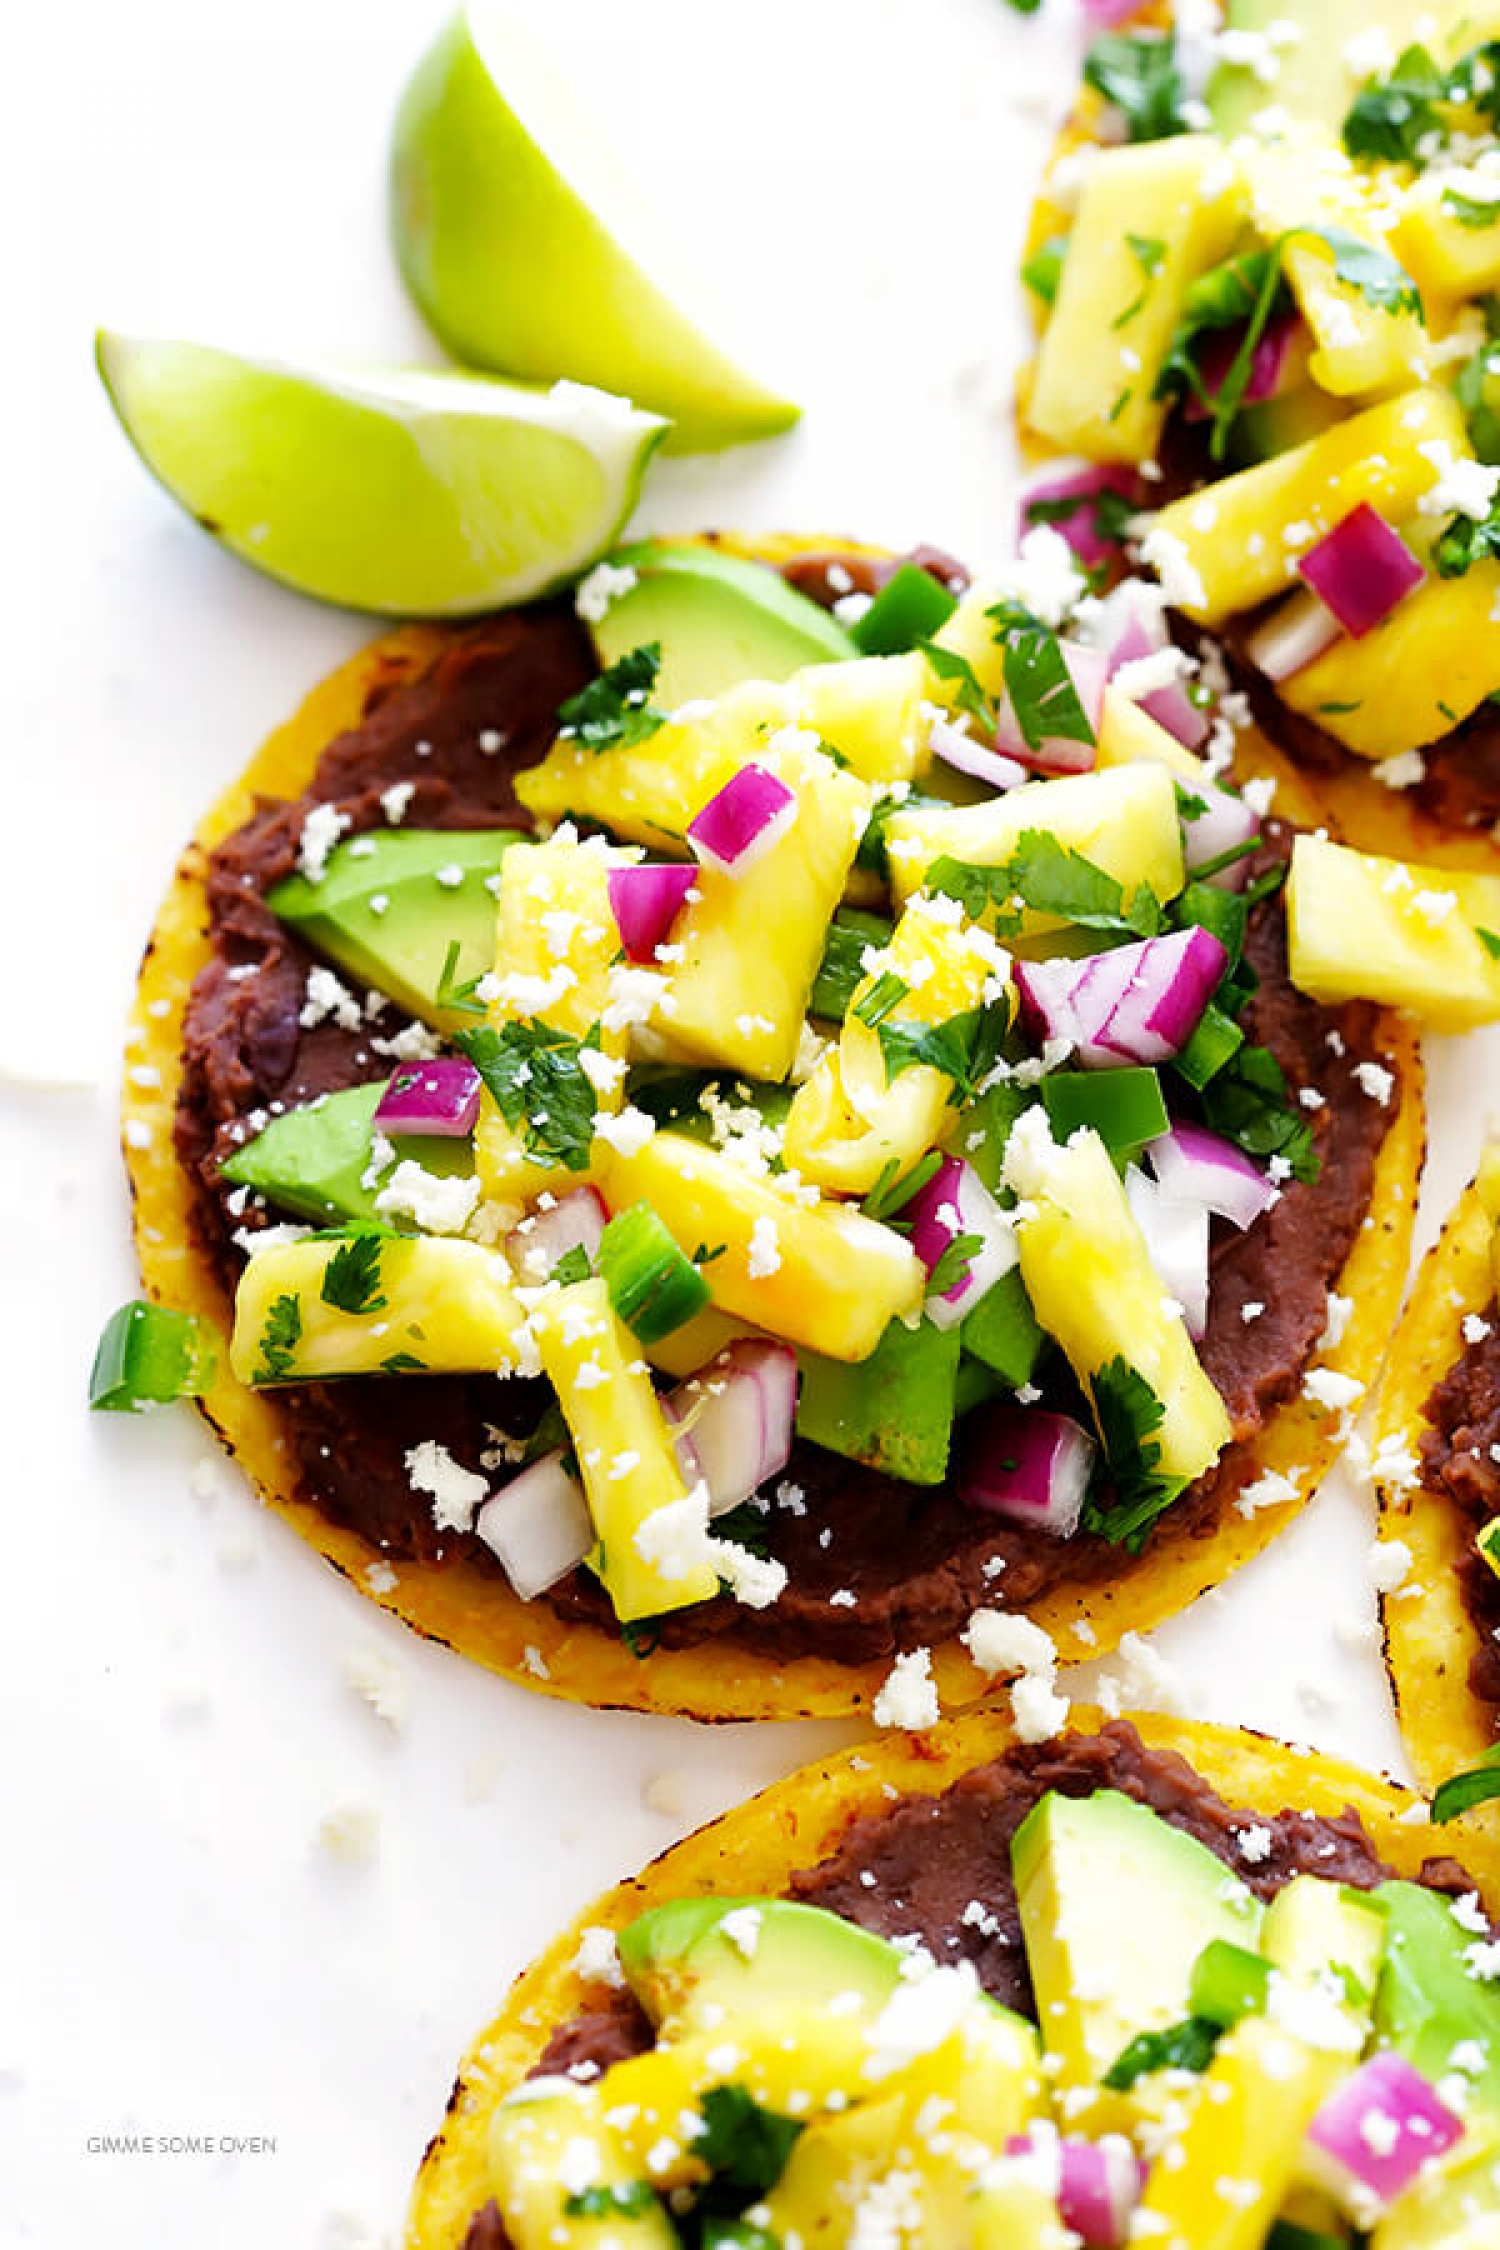 <p>Got a bunch of hungry mouths to feed and not a lot of time on your hands? These 10-minute vegetarian tostadas will delight the whole family with a combination of savory refried black beans and refreshing pineapple salsa you can whip up in no time. <a href="https://www.gimmesomeoven.com/10-minute-pineapple-black-bean-tostadas/" rel="noopener">Get the recipe here.</a></p>